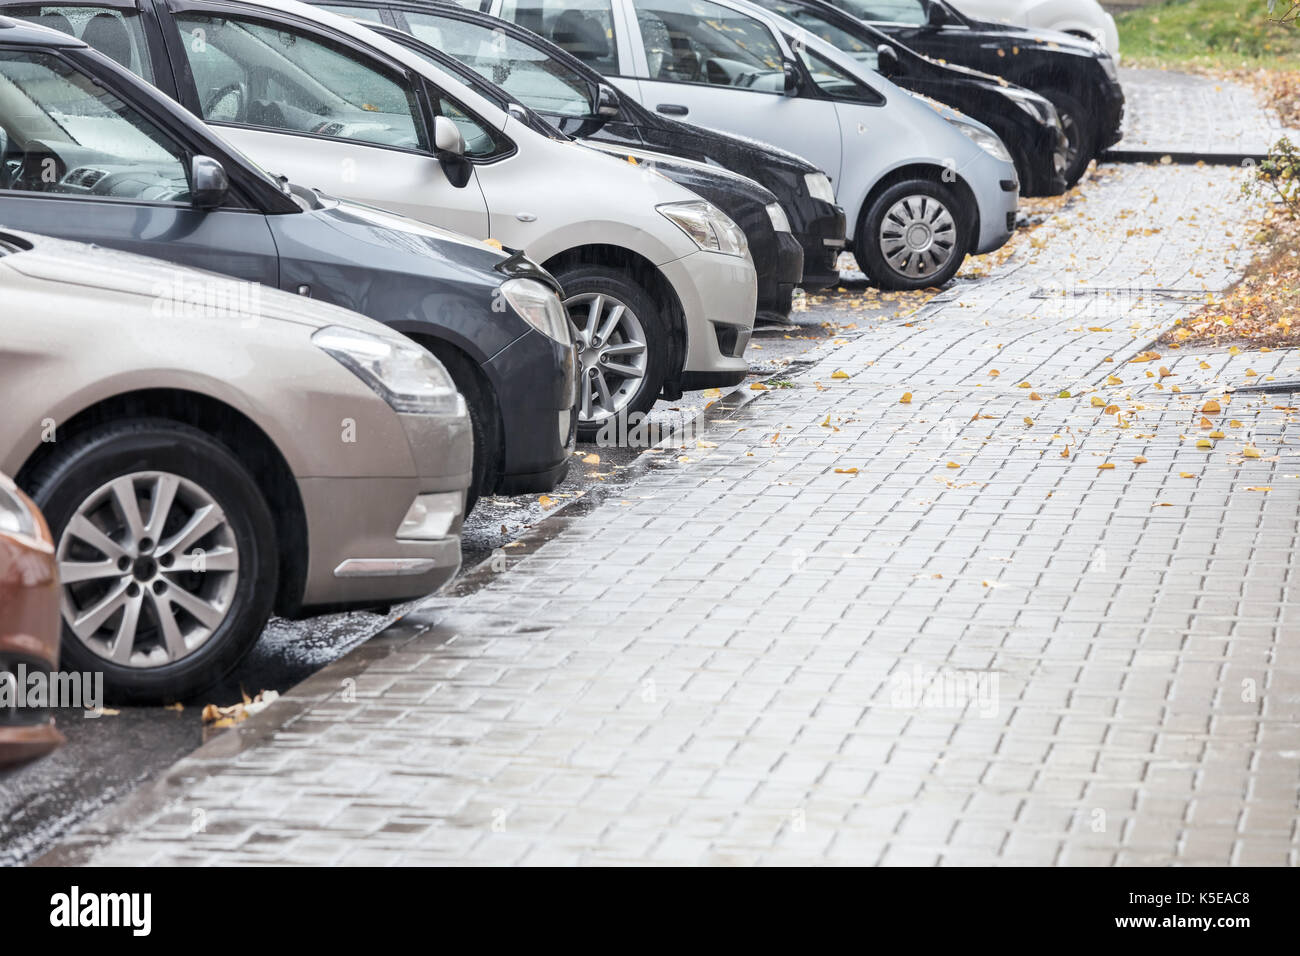 several cars parked in a parking lot on a rainy day Stock Photo